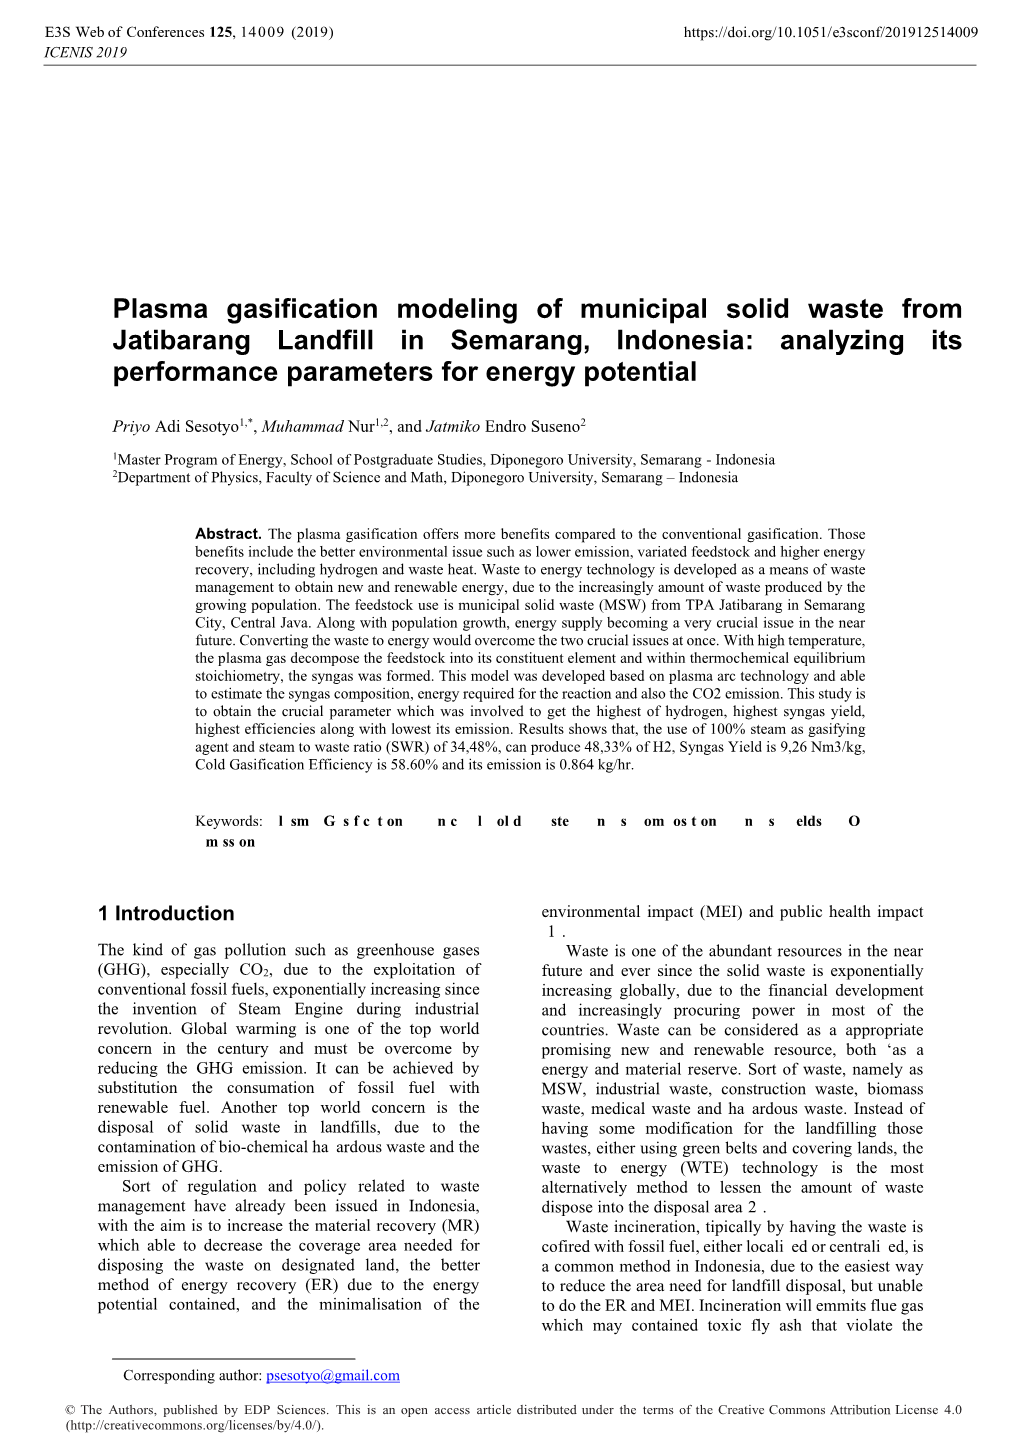 Plasma Gasification Modeling of Municipal Solid Waste from Jatibarang Landfill in Semarang, Indonesia: Analyzing Its Performance Parameters for Energy Potential